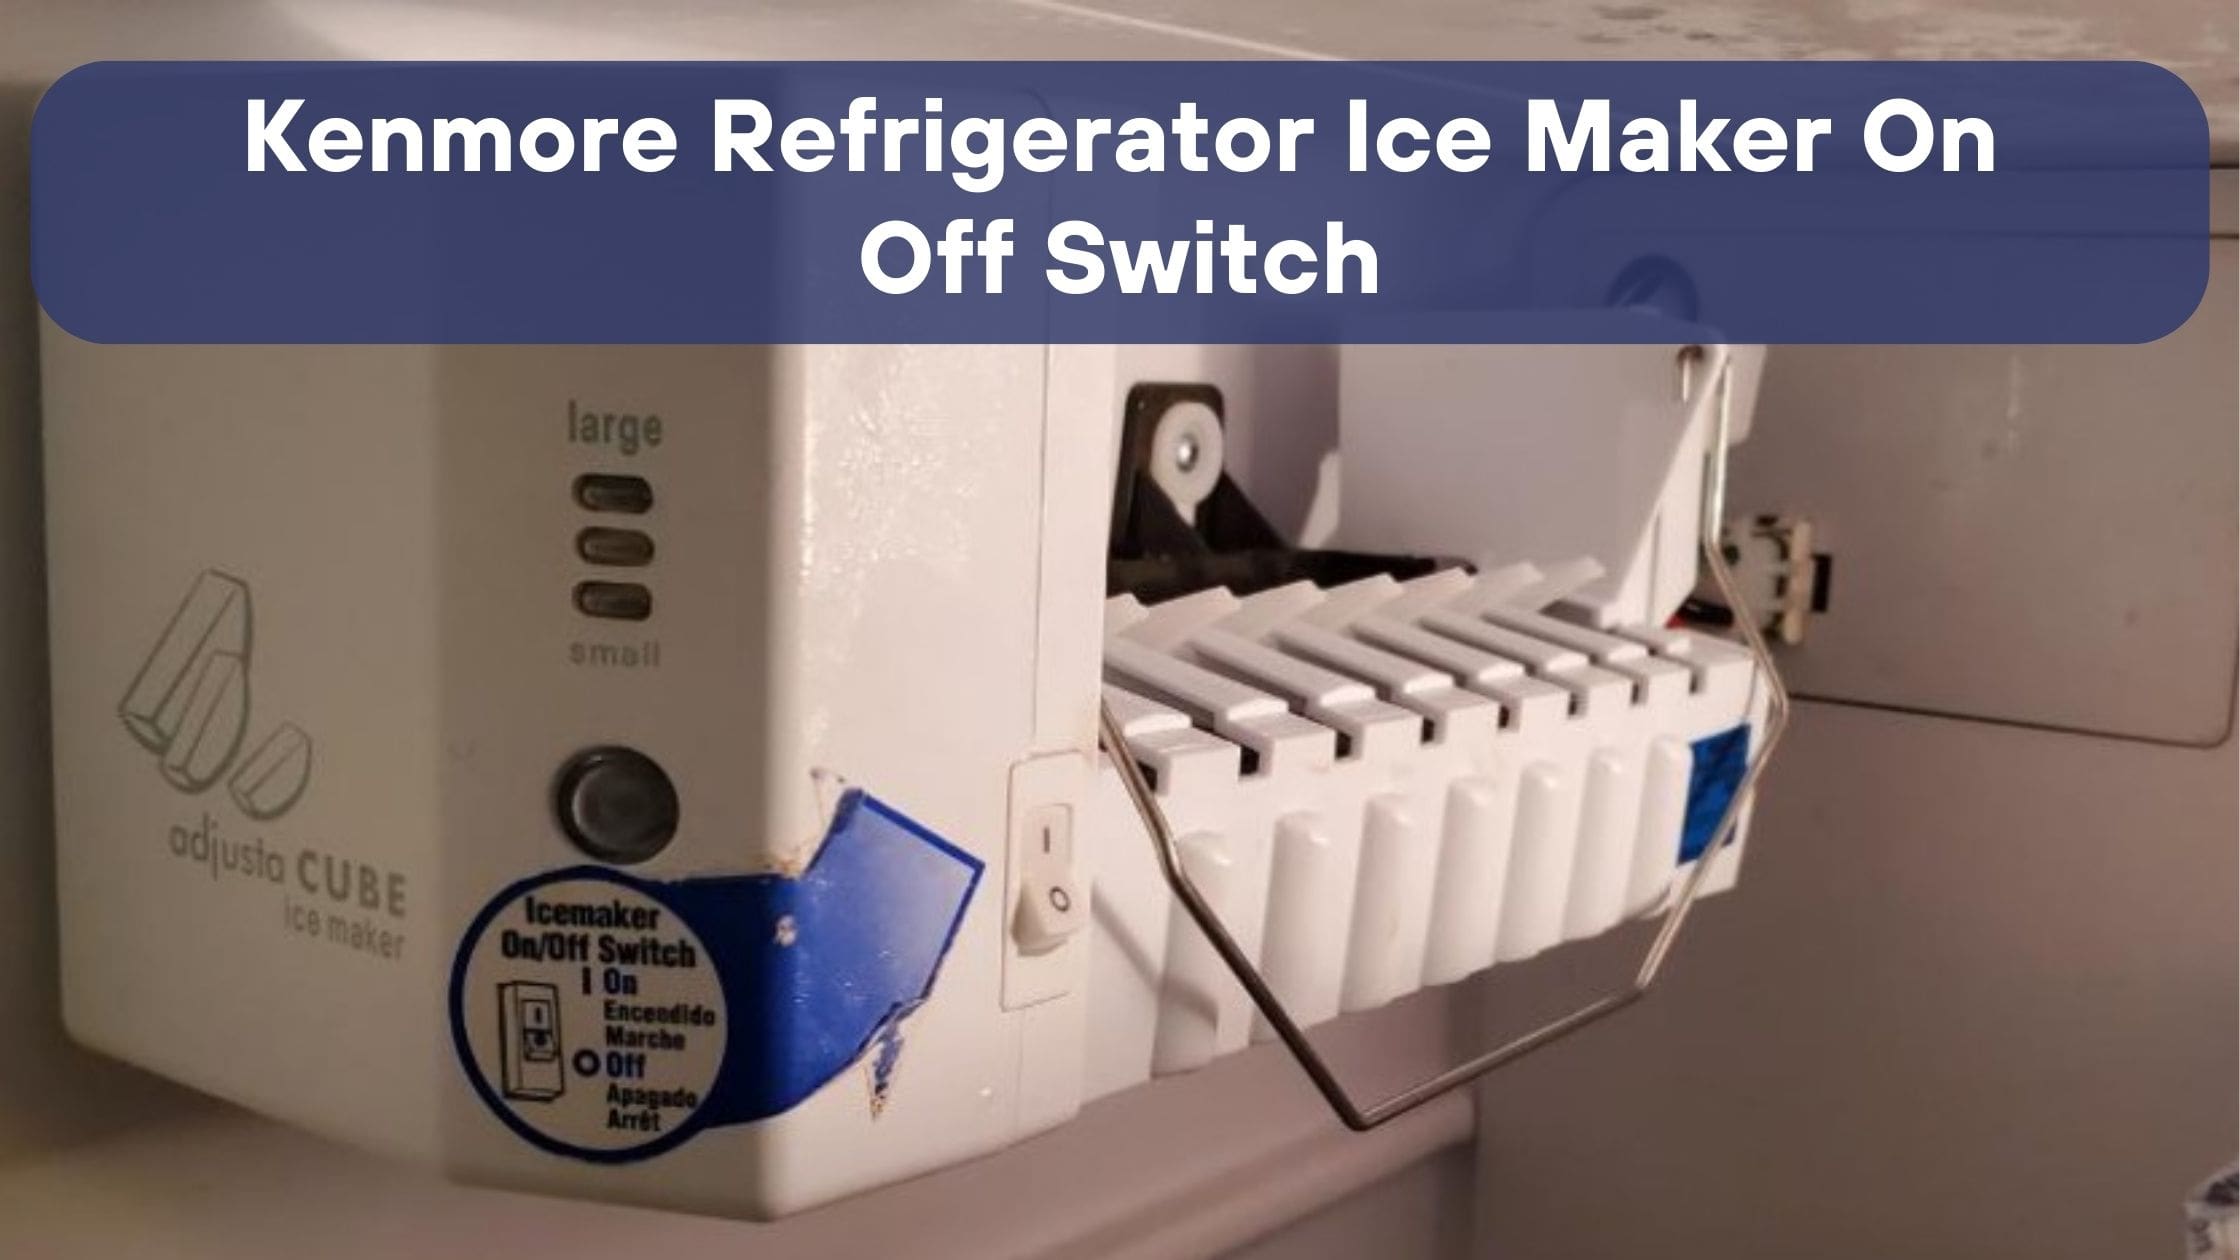 Kenmore Refrigerator Ice Maker On Off Switch [SOLVED]